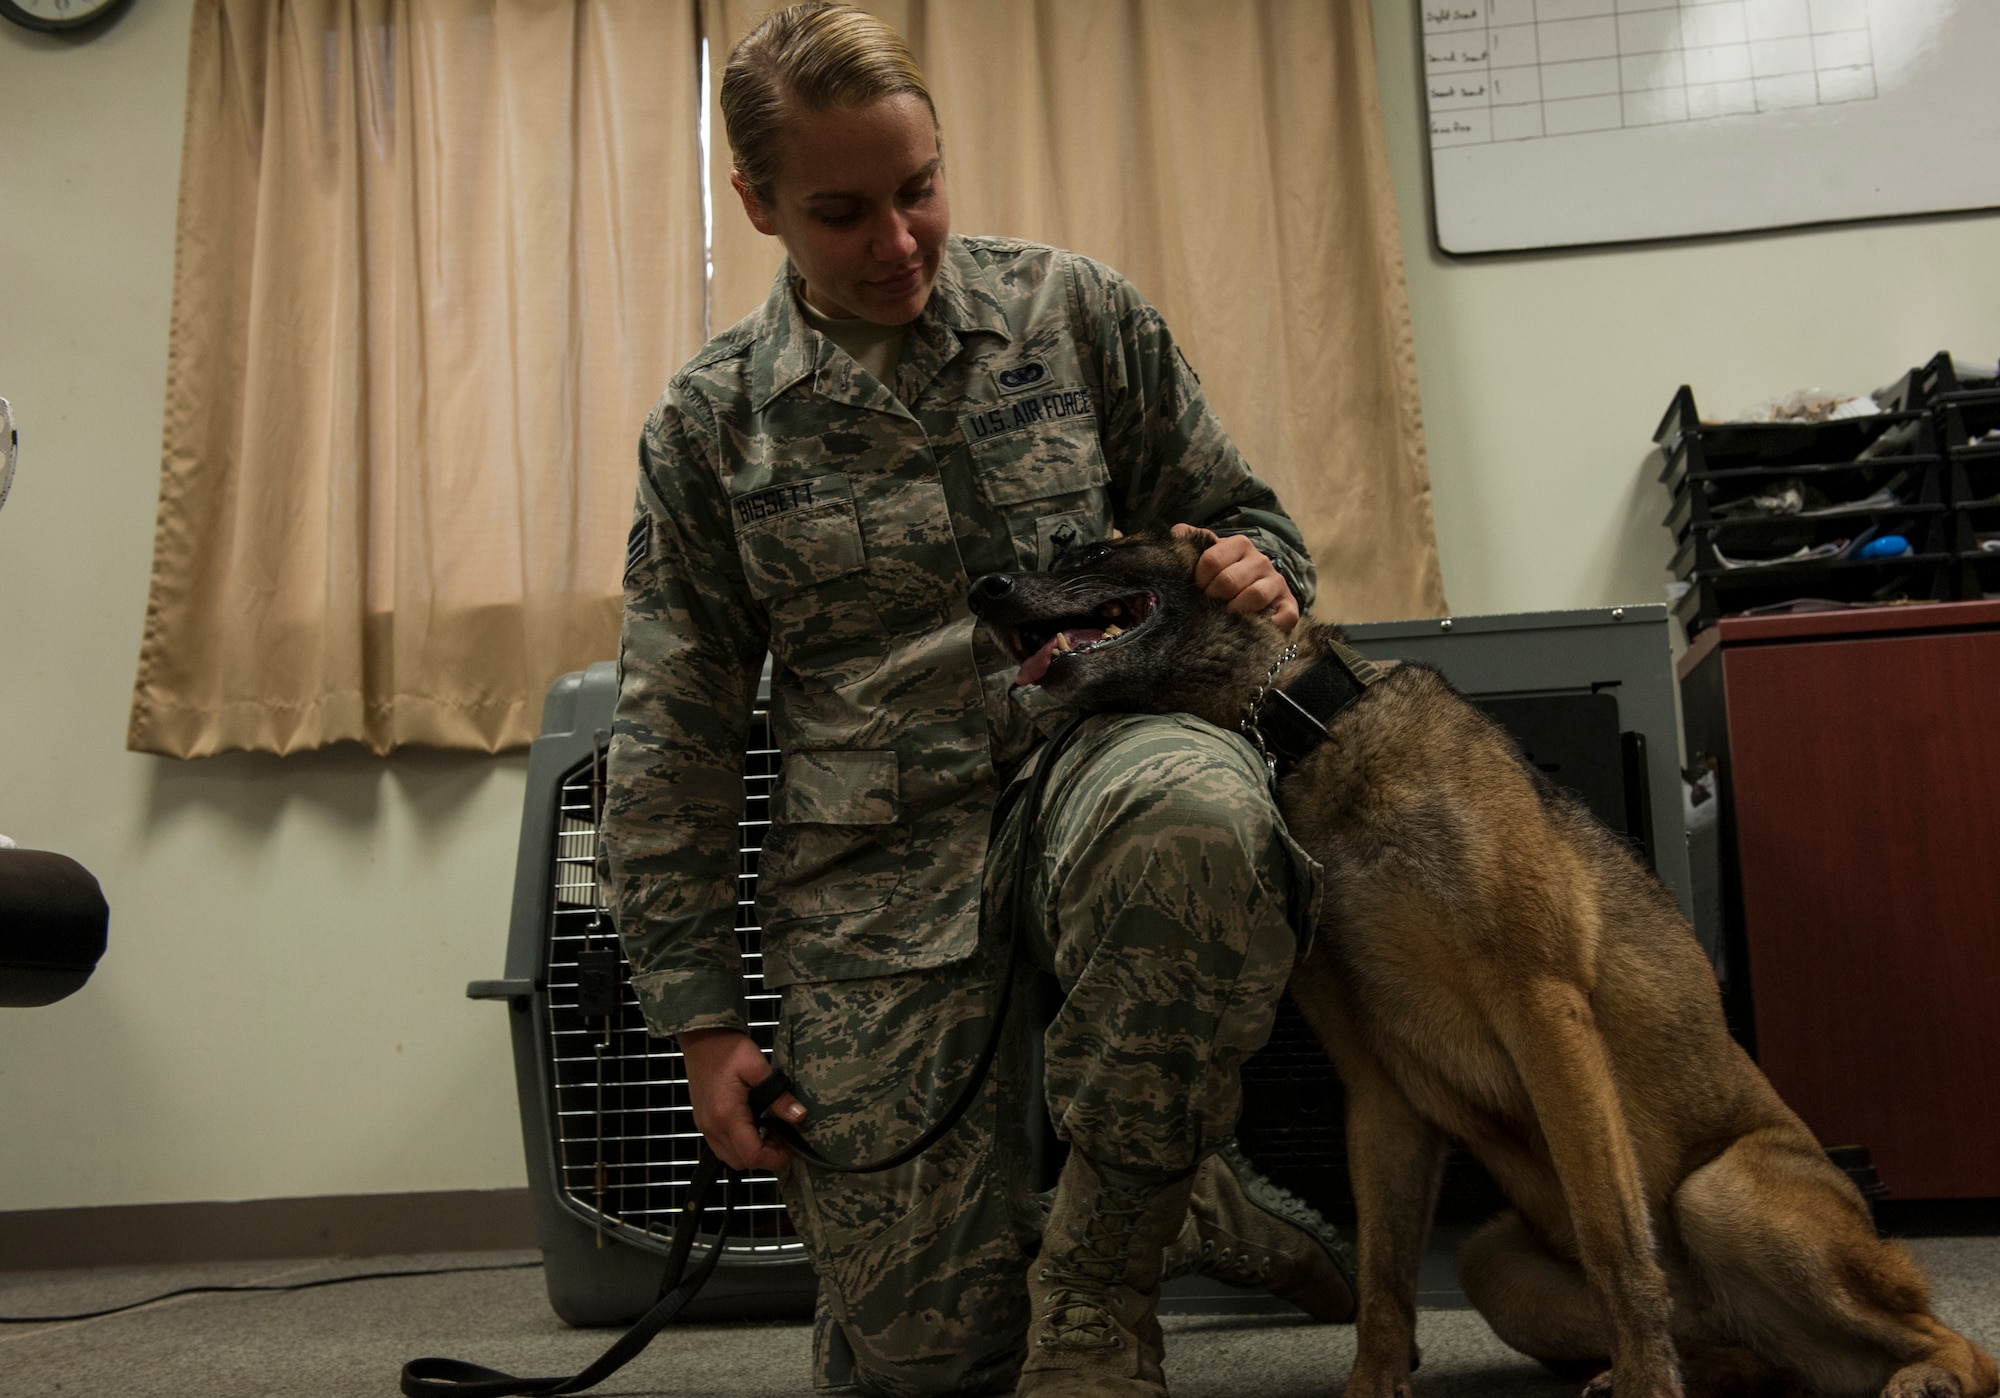 U.S. Air Force Senior Airman Rena Bissett, 18th Security Forces Squadron Military Working Dog handler, pets her MWD, Judi, April 13, 2016, at Kadena Air Base, Japan. Bissett and Judi have been working together for almost one year, and have already formed a deep bond. (U.S. Air Force photo by Airman 1st Class Lynette M. Rolen)